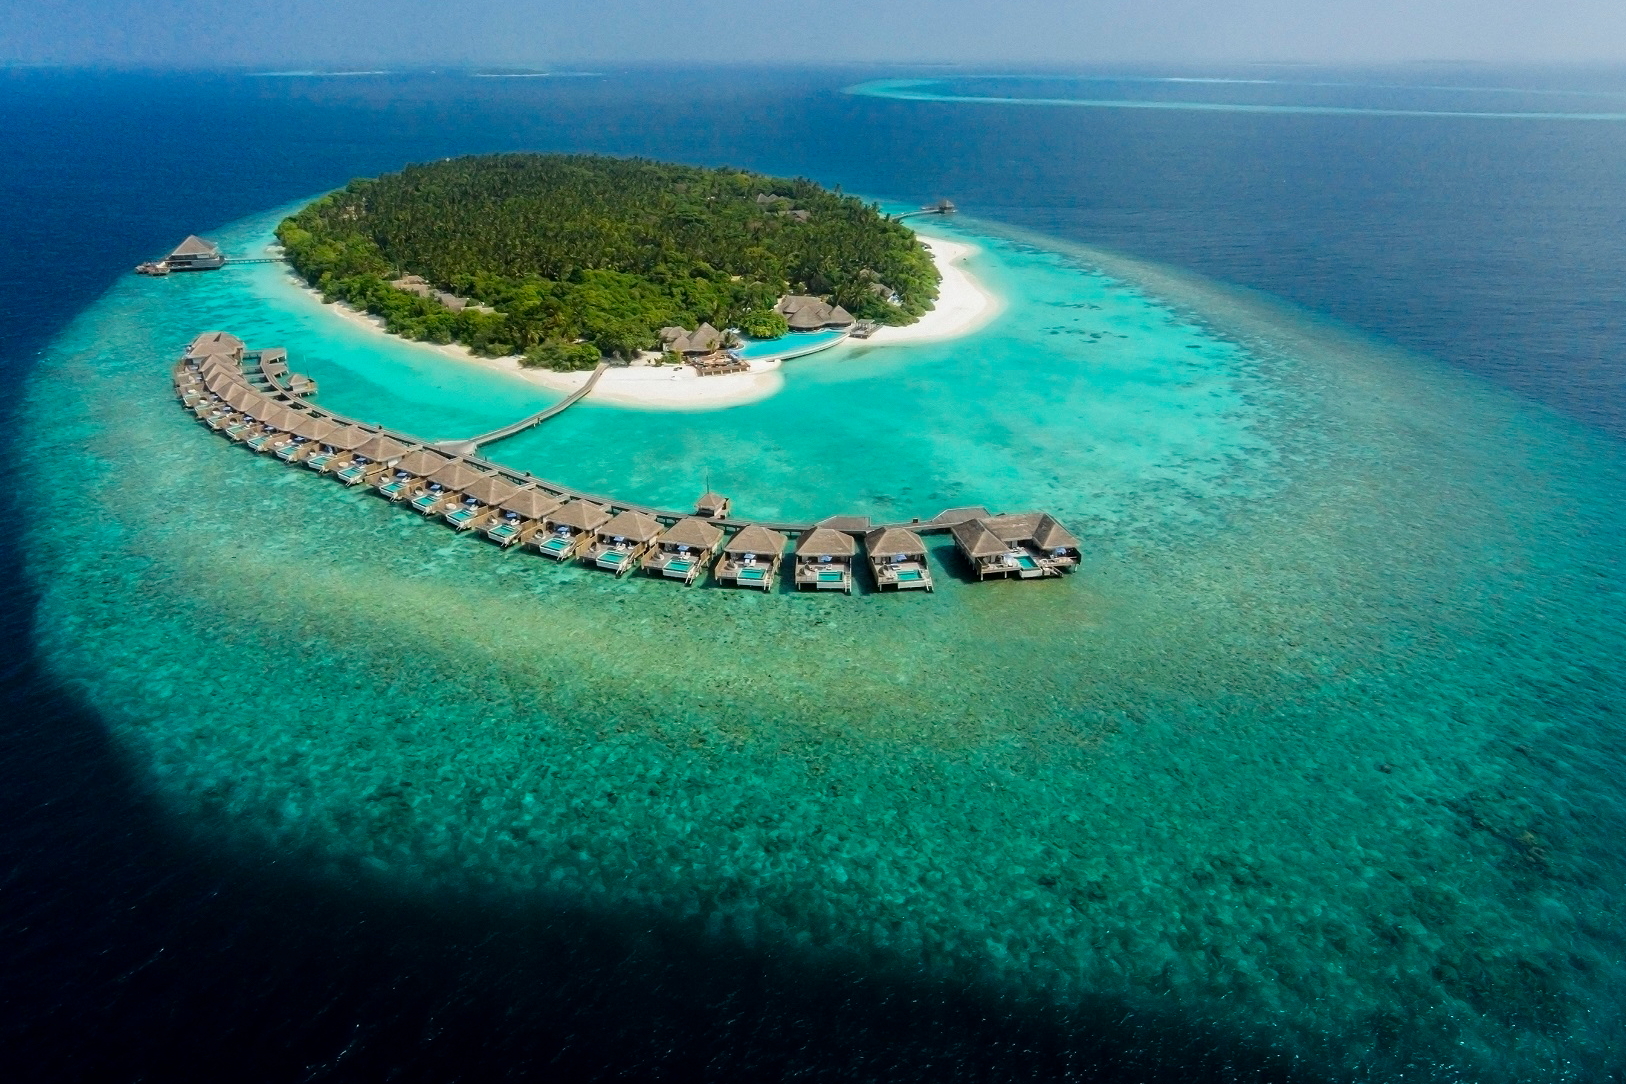 The Dusit Thani Maldives is a luxury Thai-inspired resort on Mudhdhoo Island in Baa Atoll. It is just 35 minutes by seaplane from Malé, or a 25-minute domestic flight and 10 minutes by speedboat from Dharavandhoo Airport. Click to enlarge.